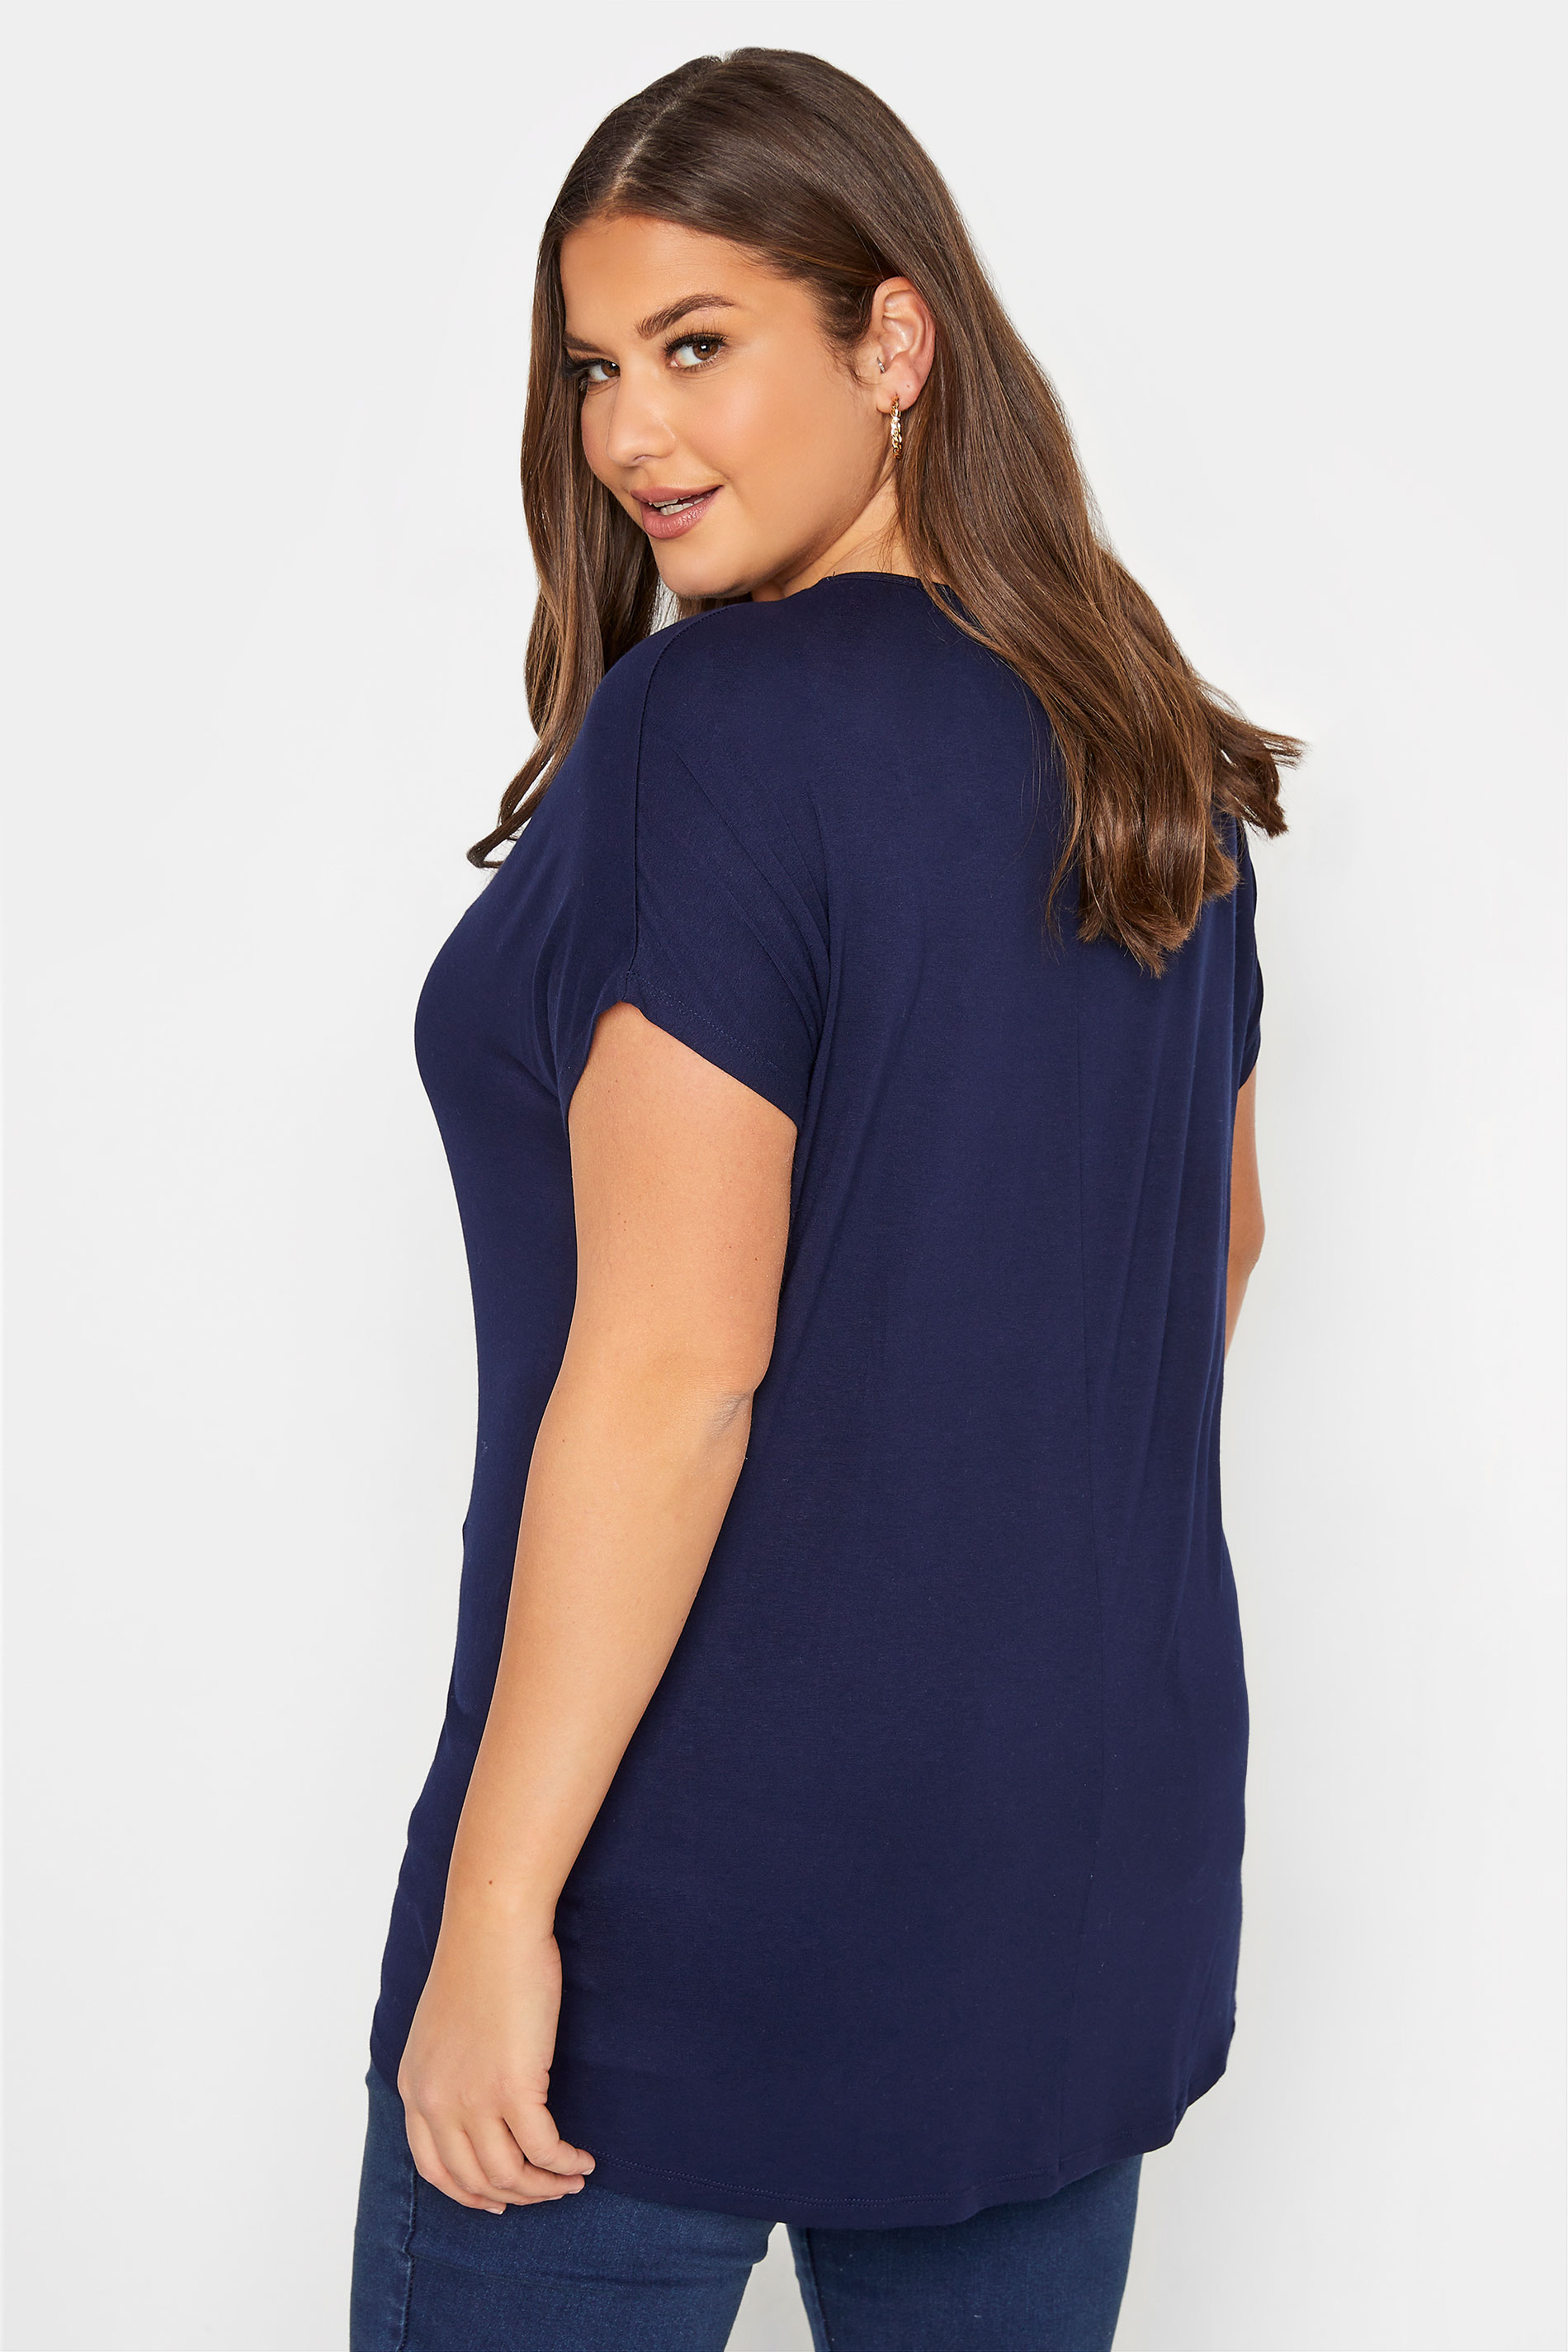 Grande taille  Tops Grande taille  T-Shirts | T-Shirt Bleu Marine Manches Courtes Jersey - XS98680